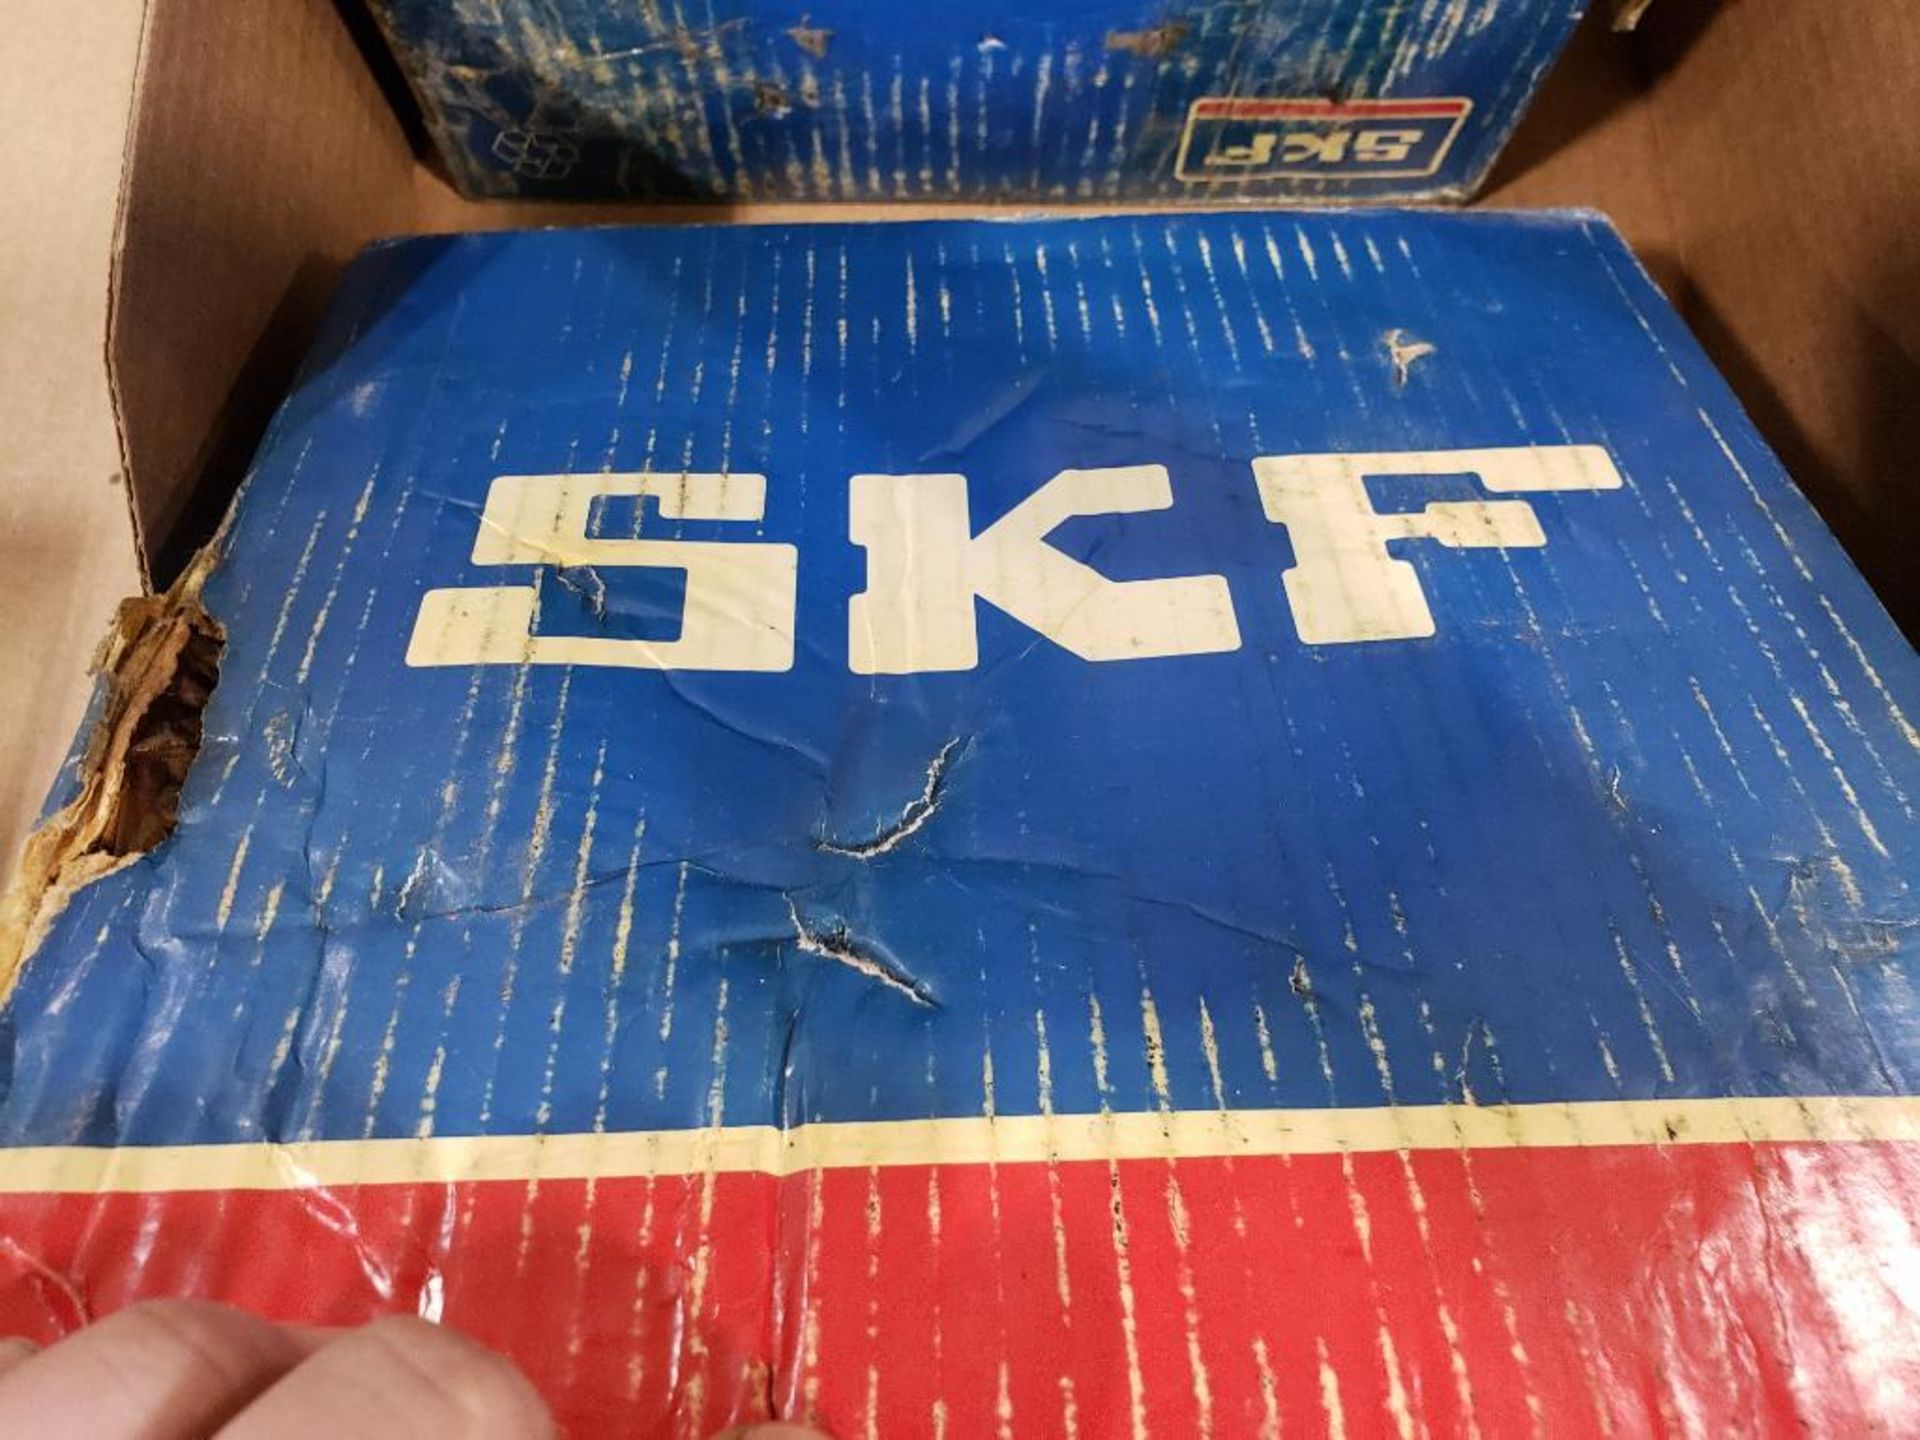 Qty 2 - SKF bearings. Part number 22226E. - Image 4 of 4